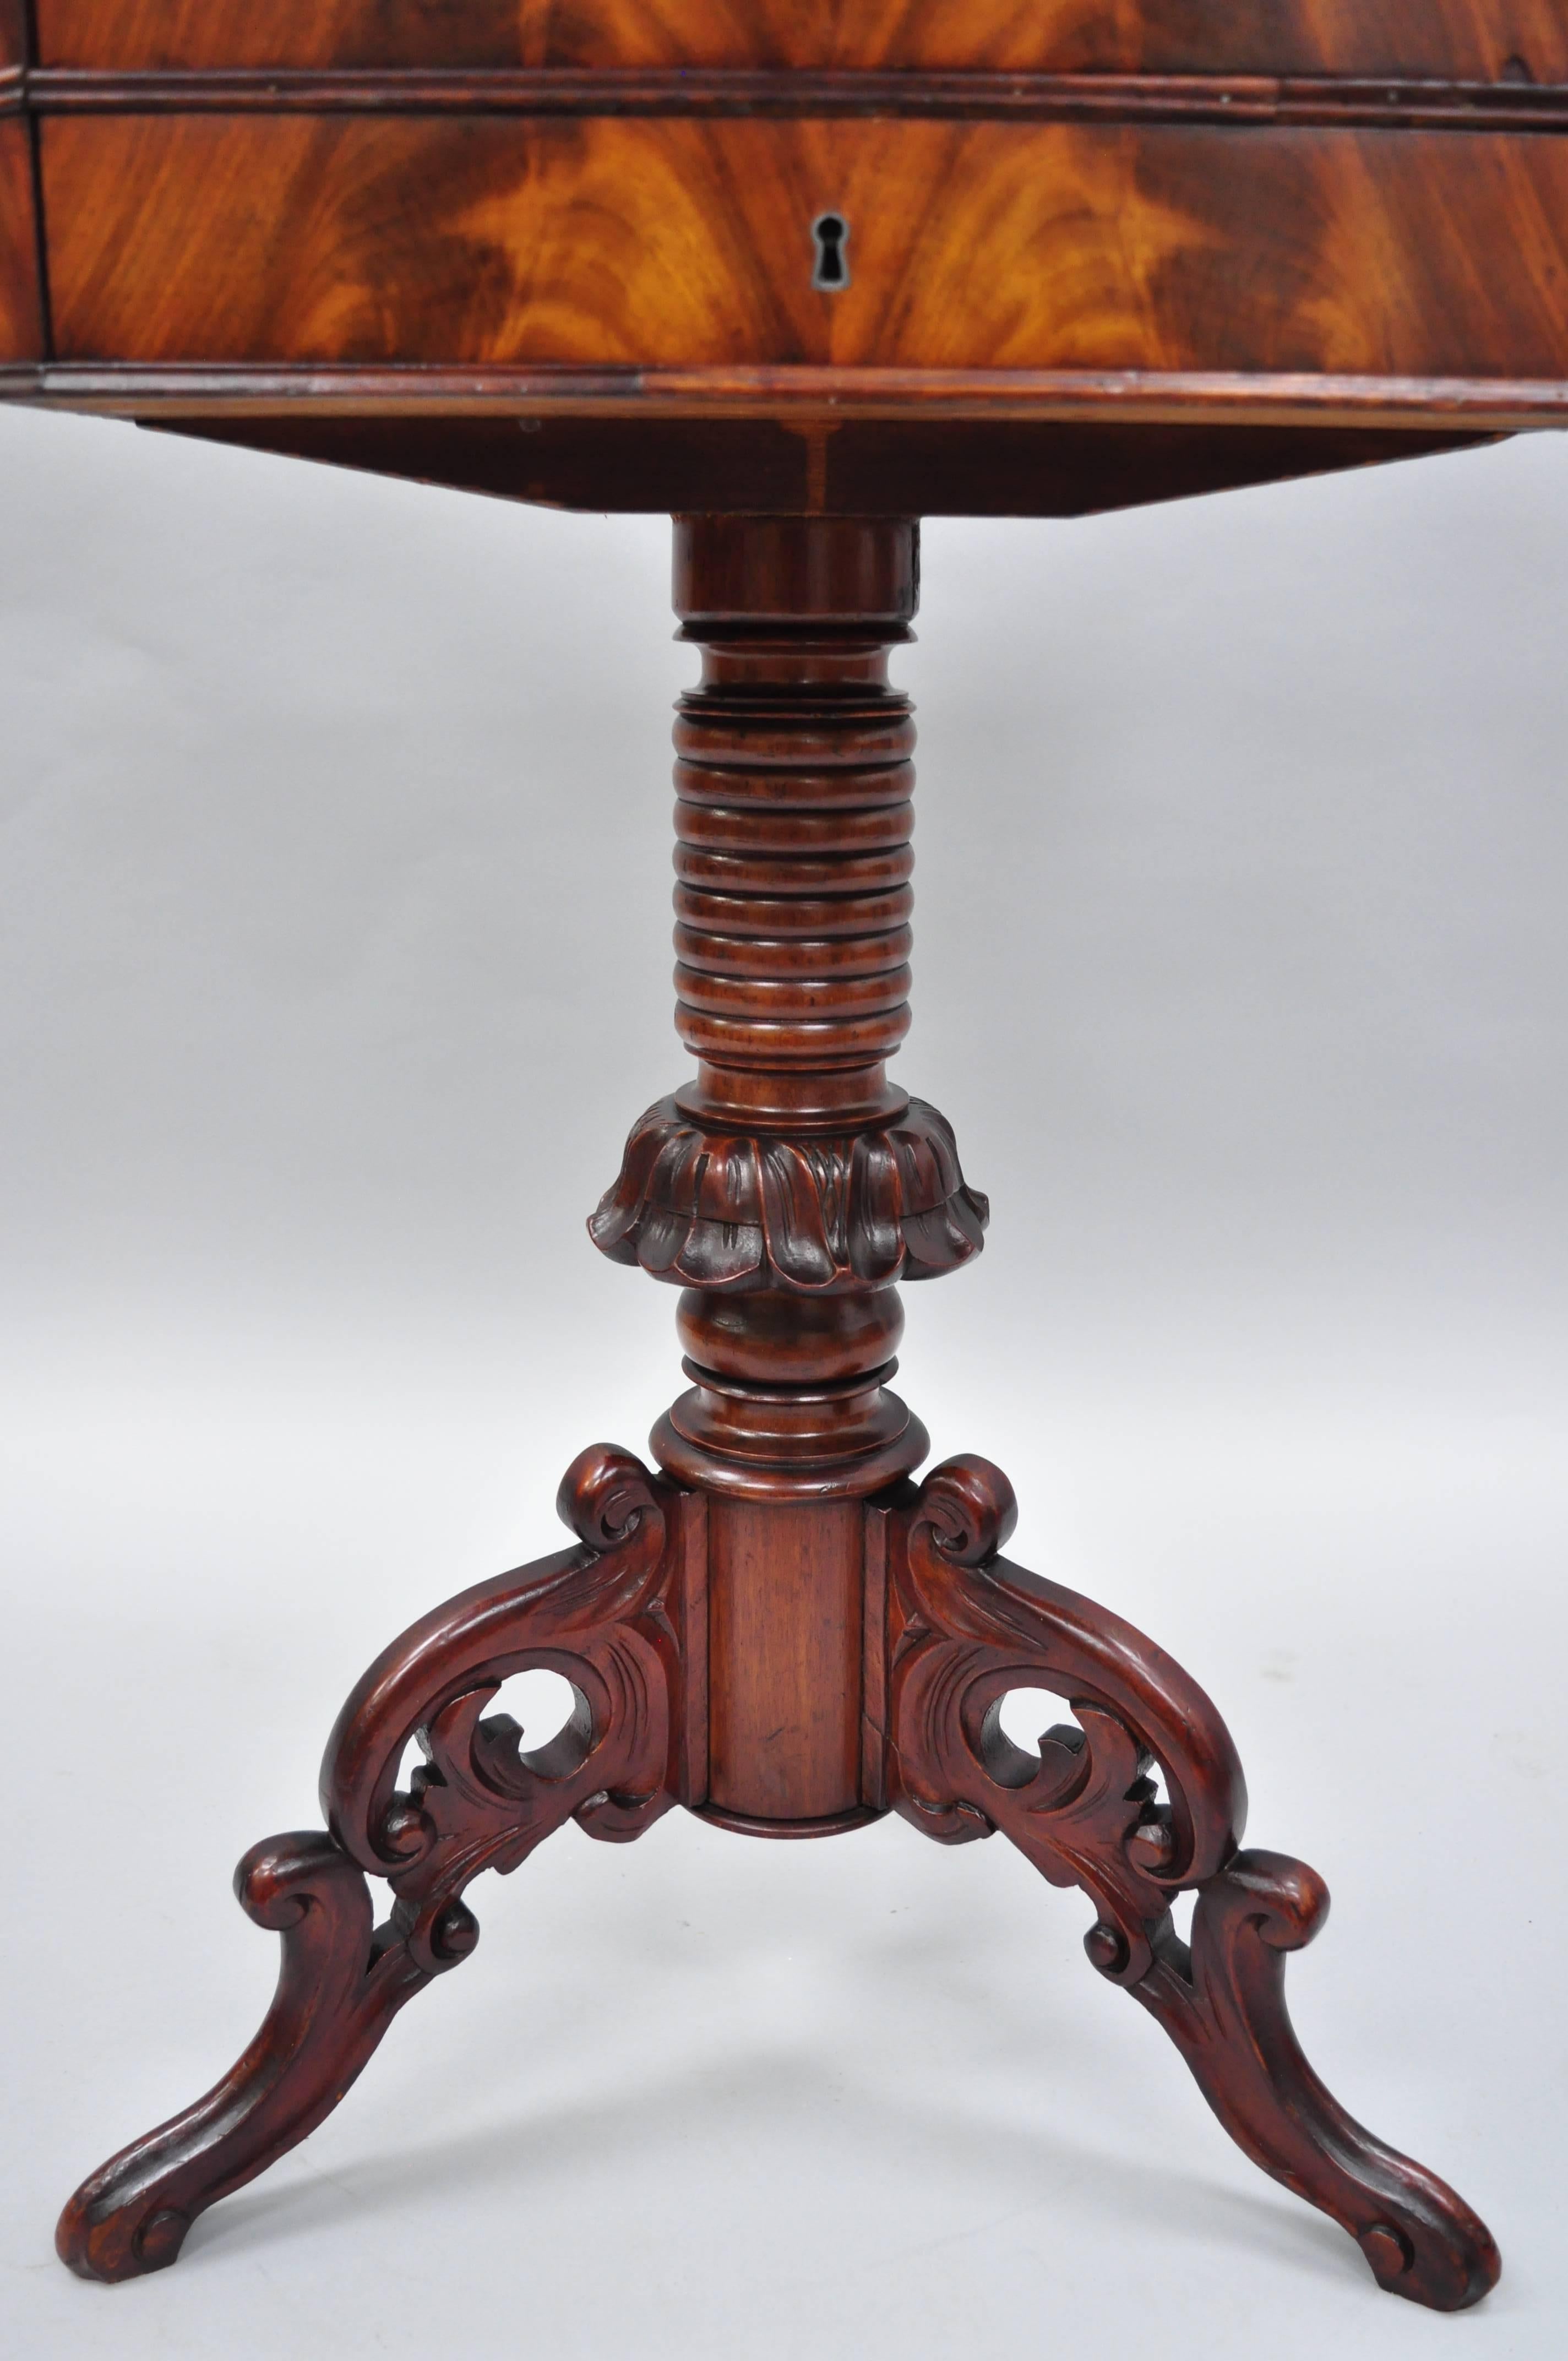 19th Century Antique Victorian Sewing Stand Side Table Crotch Mahogany and Walnut Flip Top